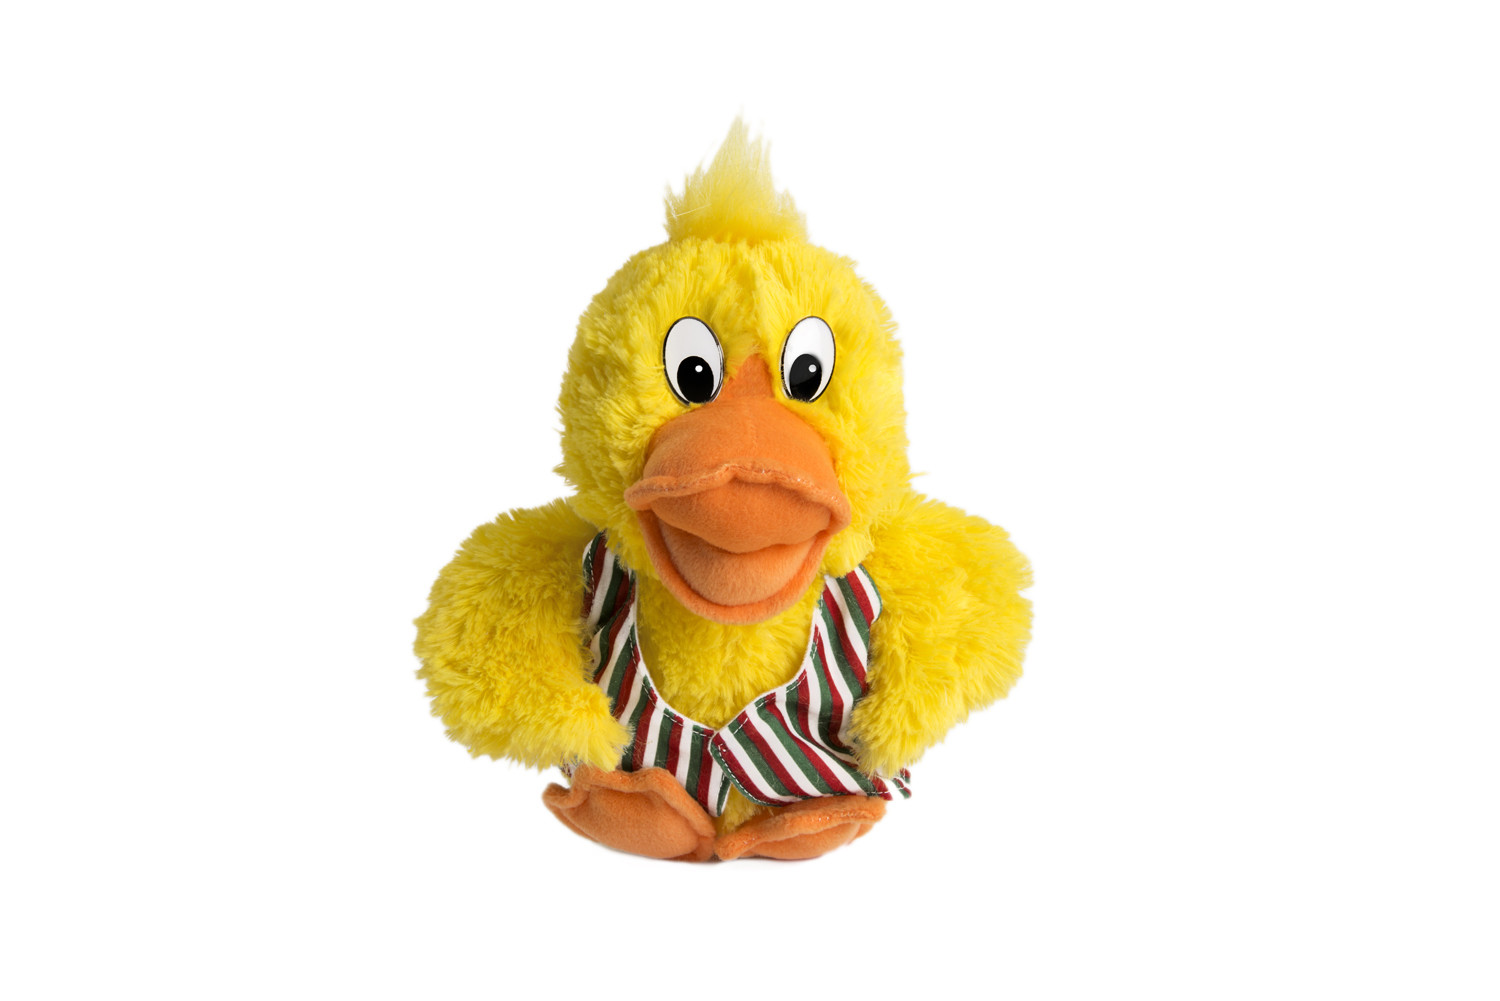 SUMMER TERM DEALS! Buy a small disco duck soft toy and receive a disco duck CD FREE! (offer only valid while stocks last).